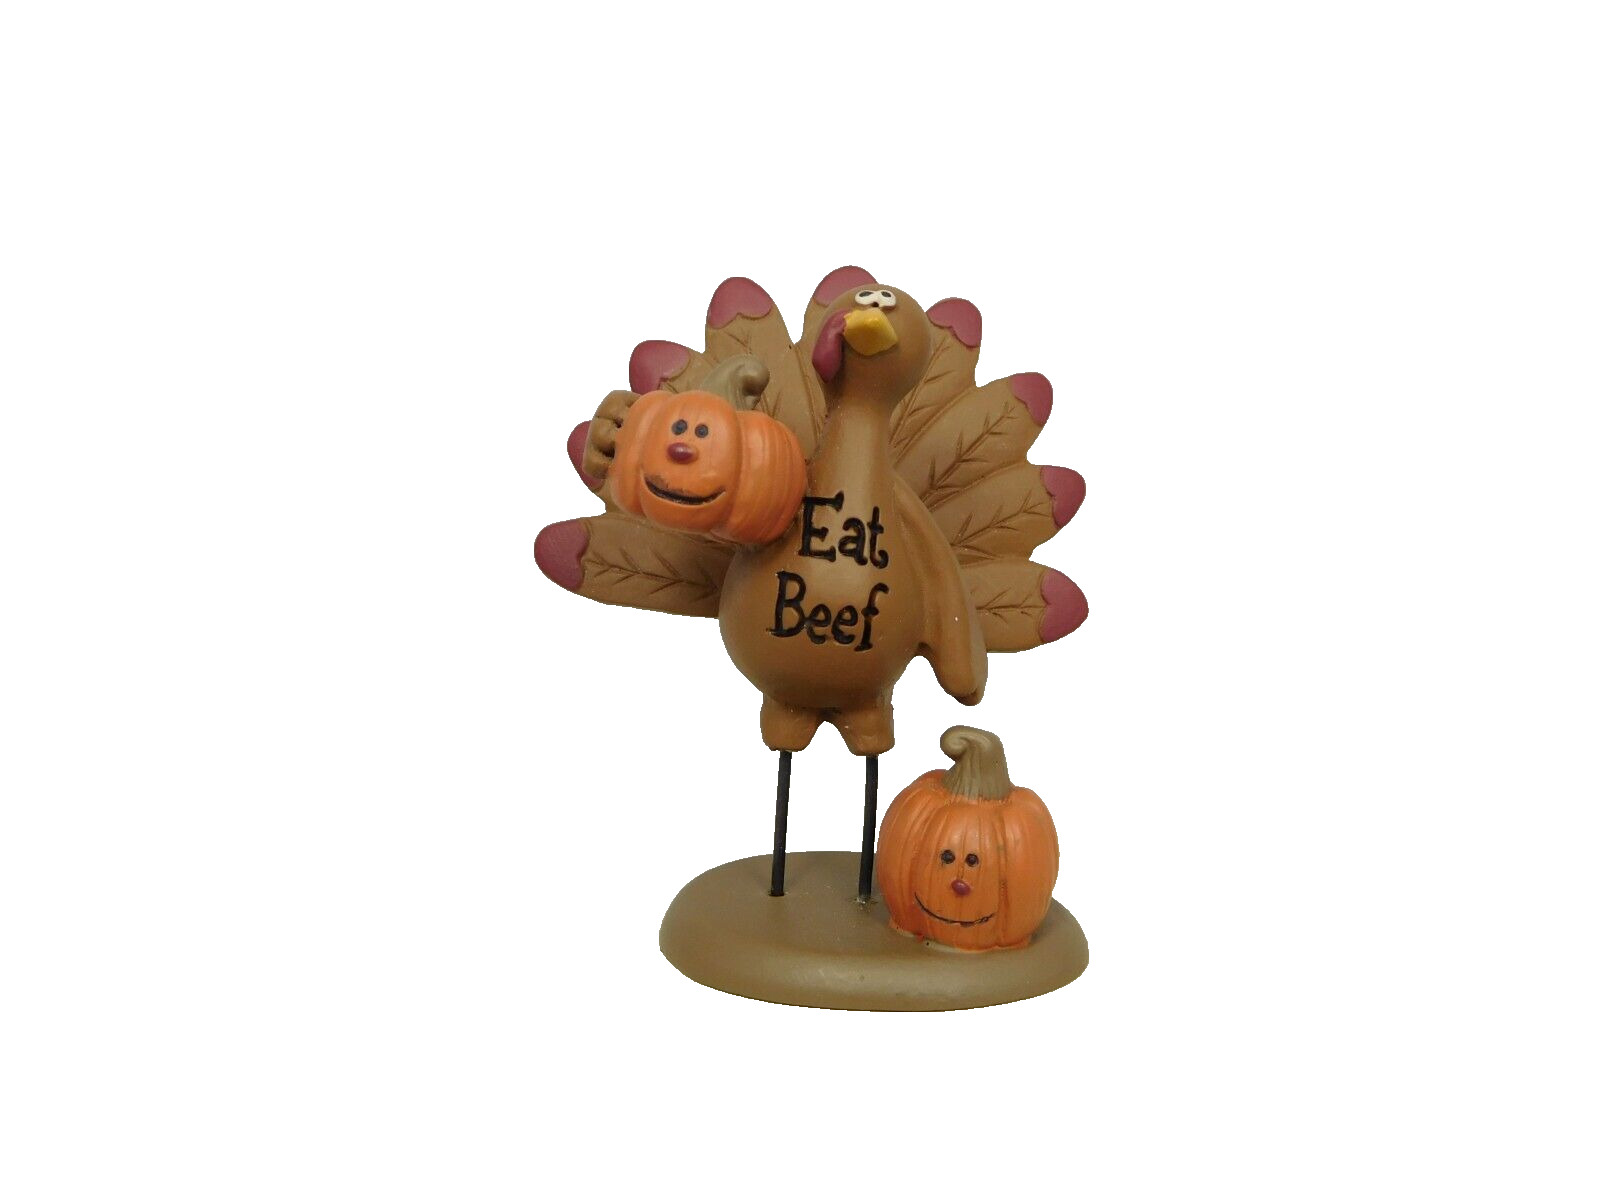 Mini Turkey telling you Eat Beef with pumpkins - New by Blossom Bucket #89869A